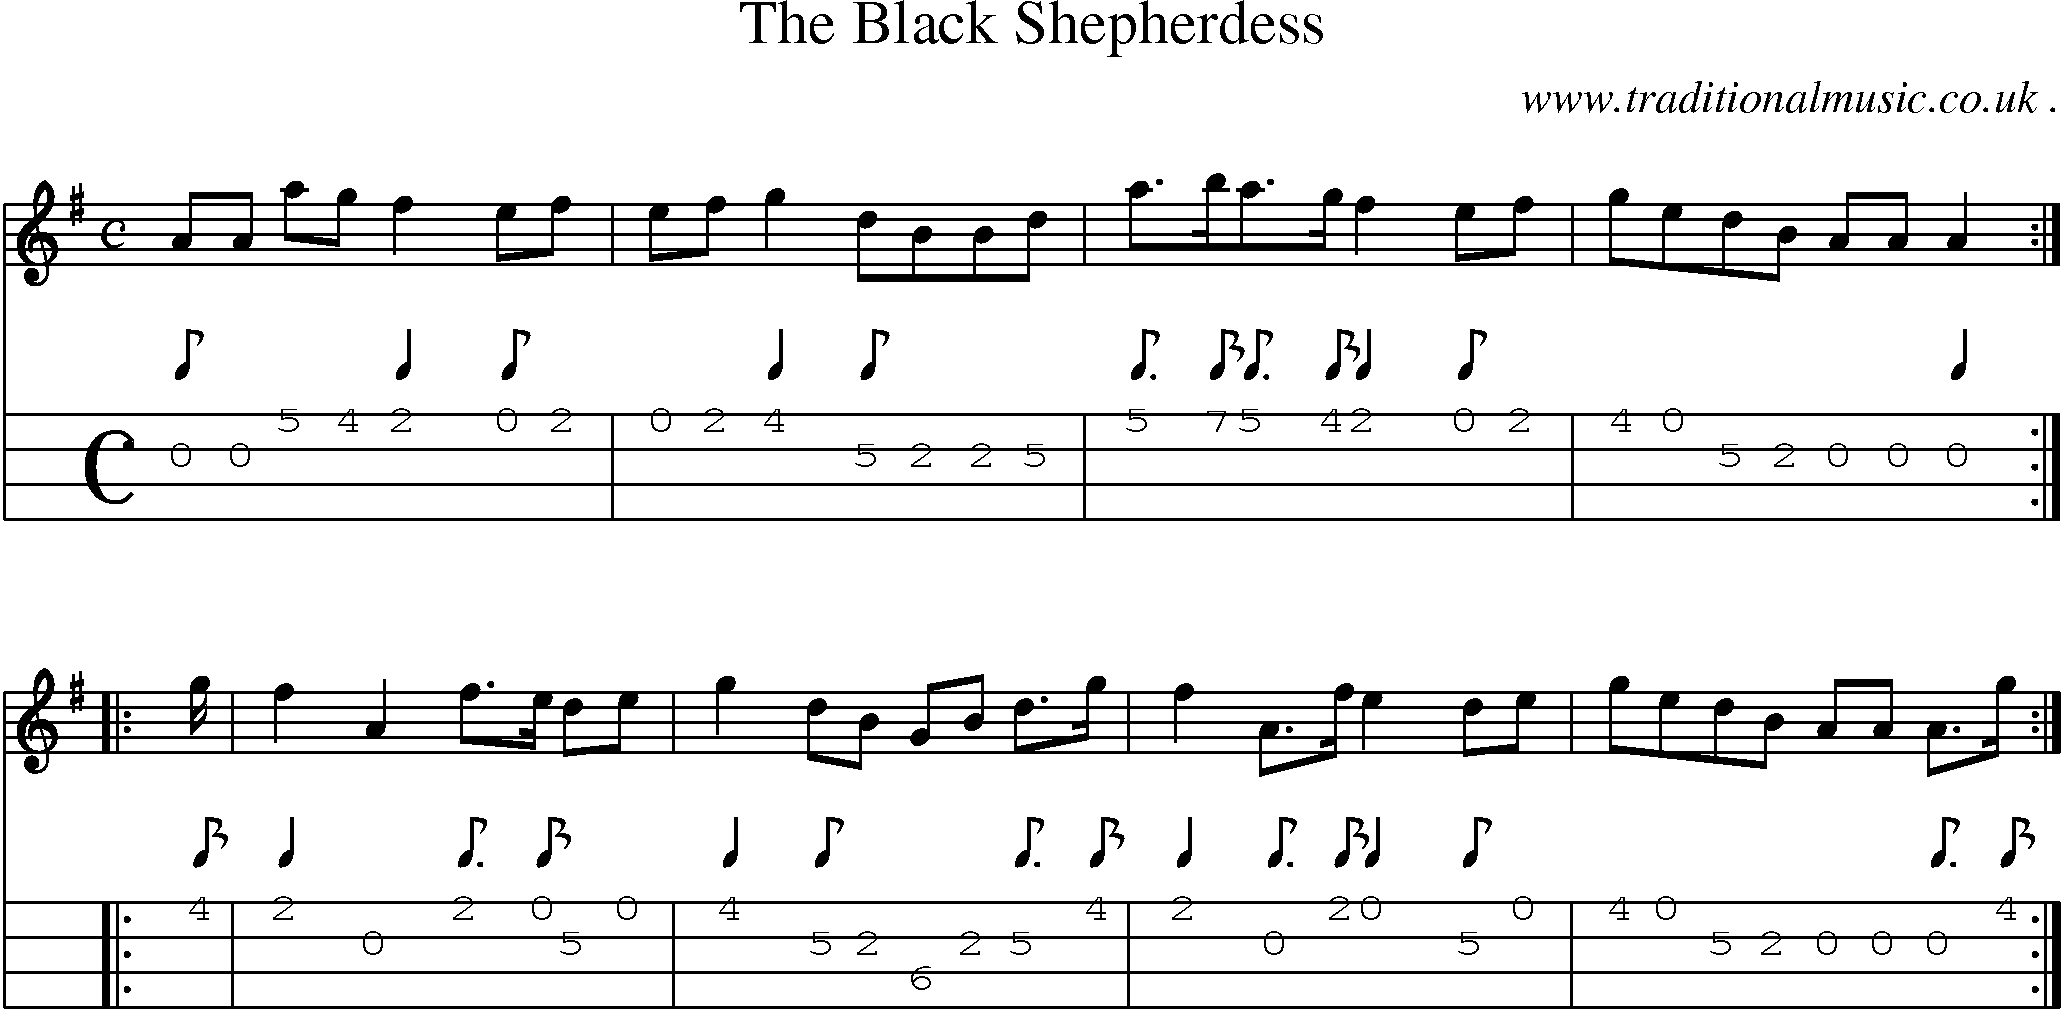 Sheet-music  score, Chords and Mandolin Tabs for The Black Shepherdess